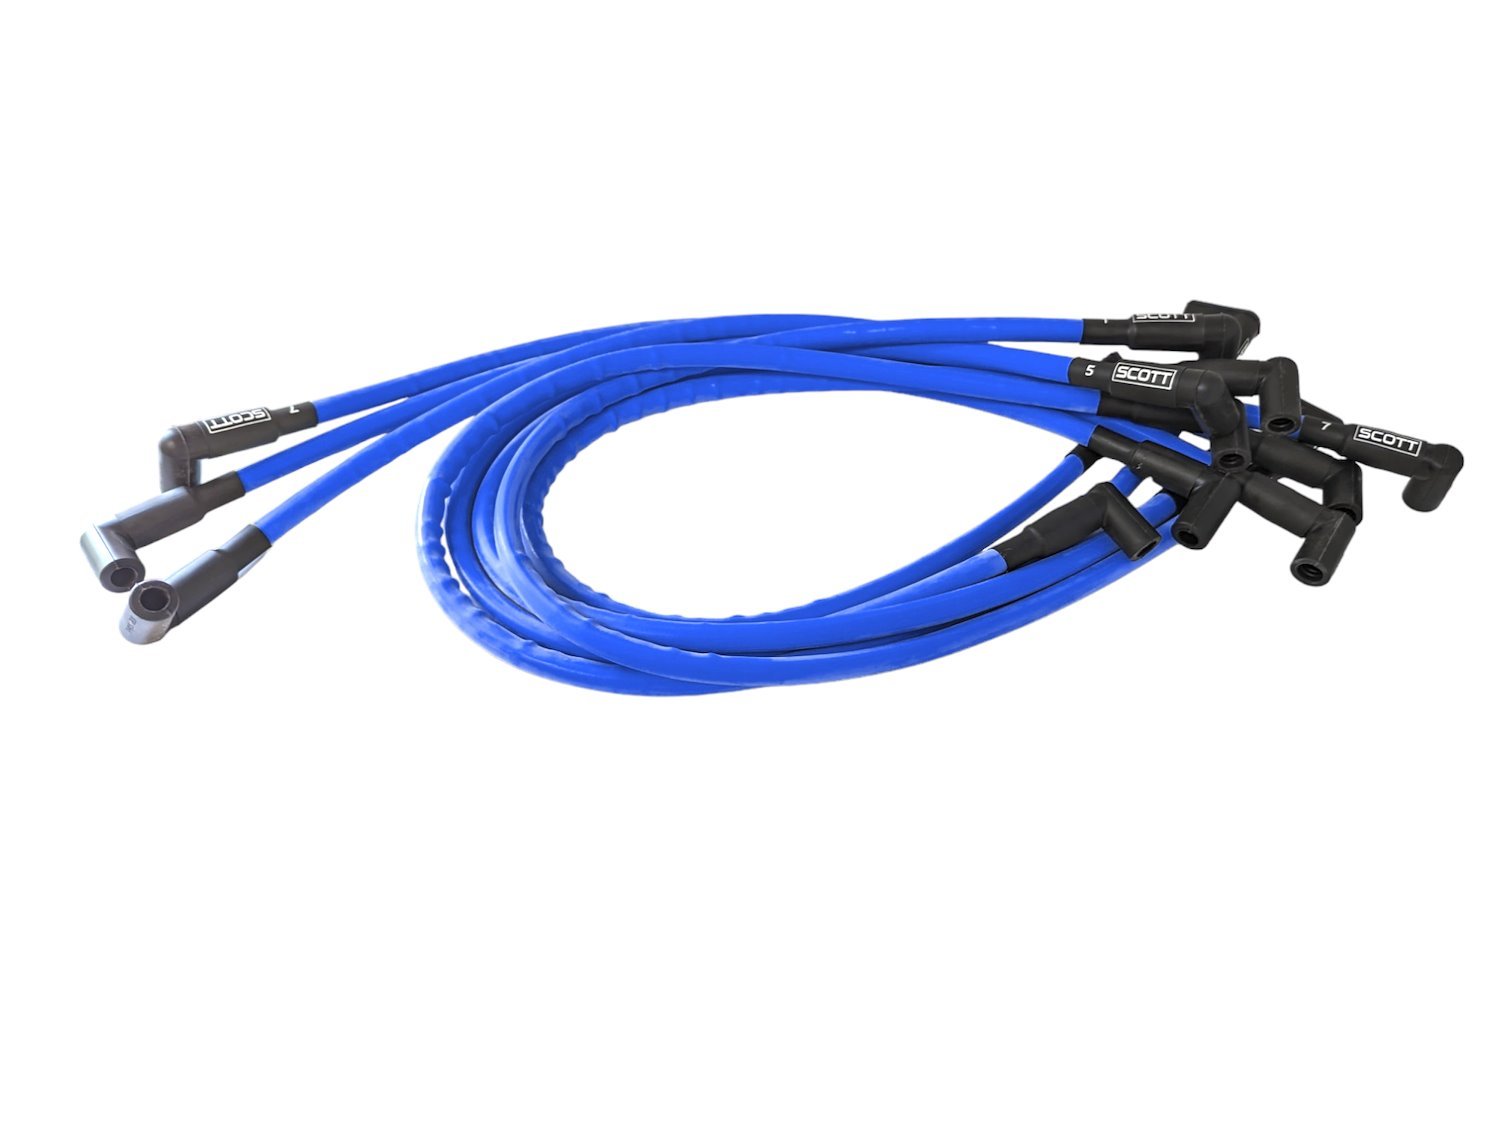 SPW300-CH-437-4 Super Mag Fiberglass-Oversleeved Spark Plug Wire Set for Small Block Chevy, Over & Under [Blue]